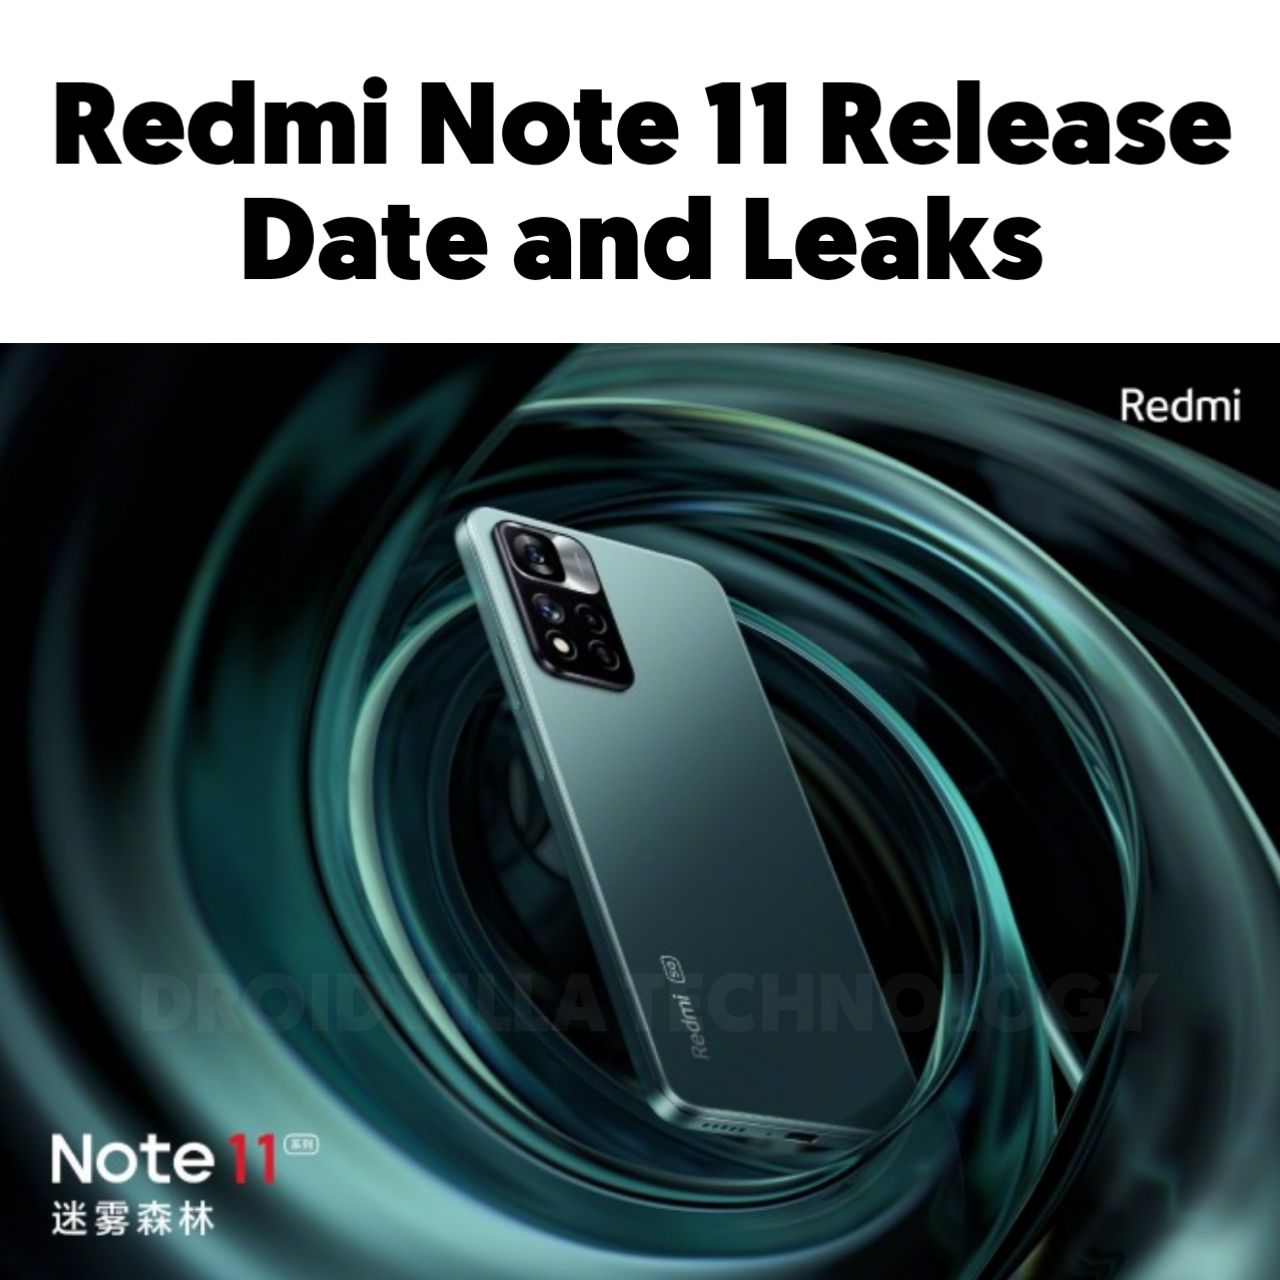 Redmi Note 11 Release Date and Leaks